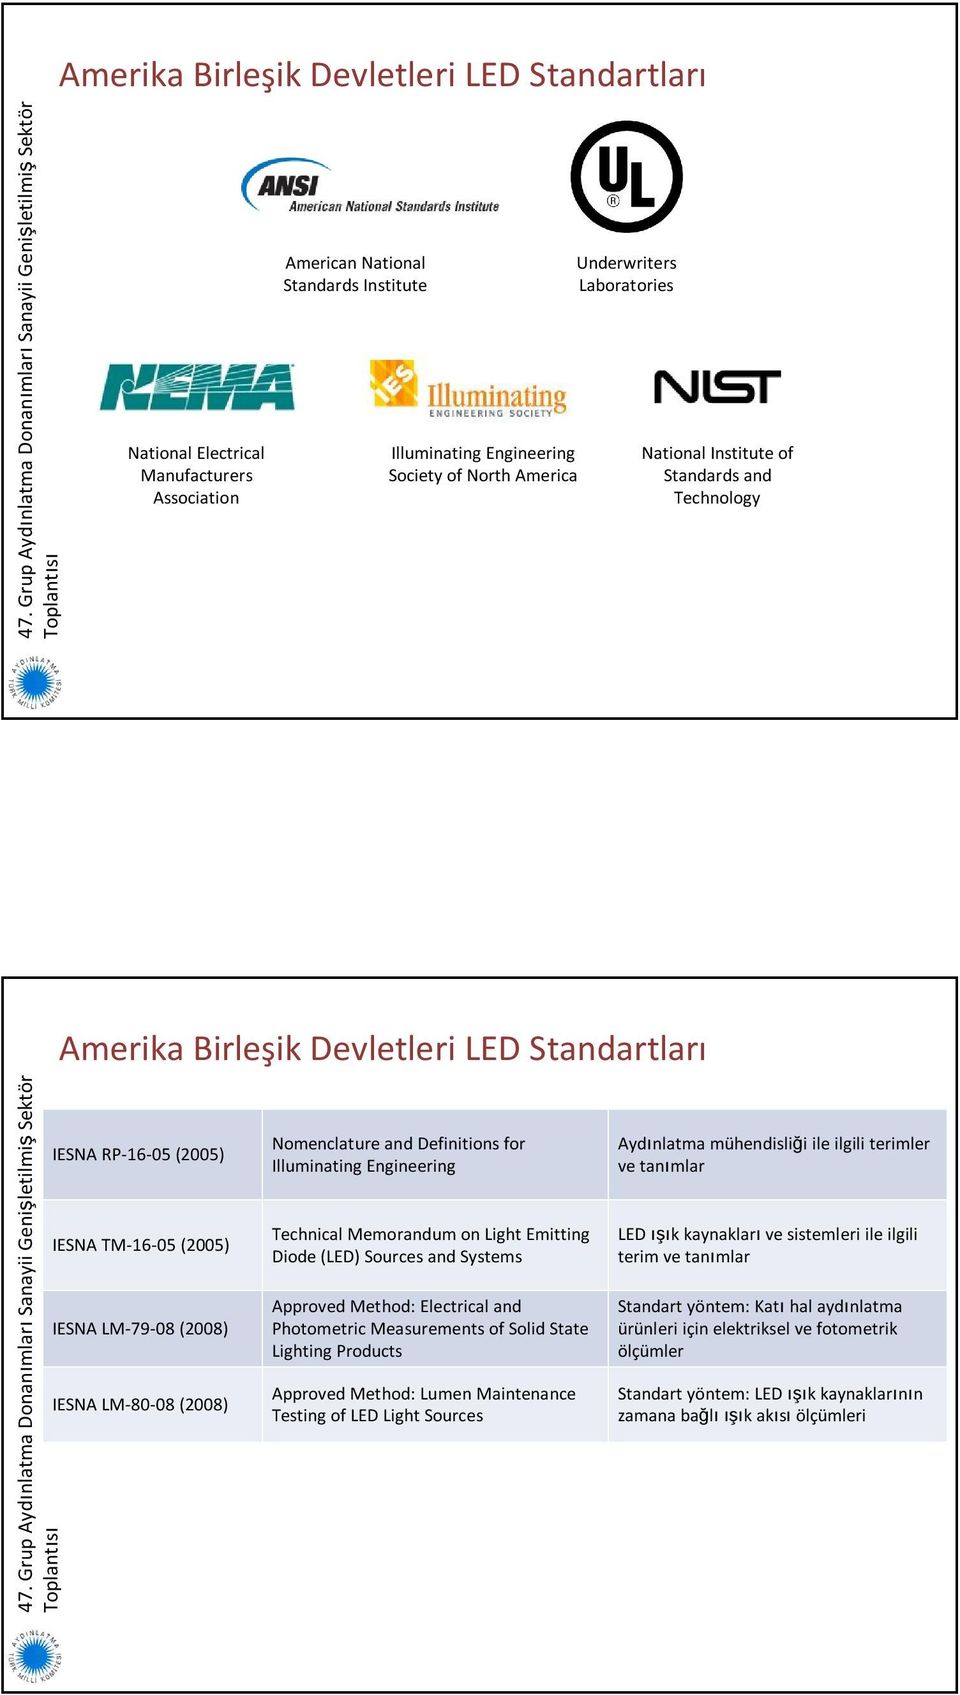 Nomenclature and Definitions for Illuminating Engineering Technical Memorandum on Light Emitting Diode (LED) Sources and Systems Approved Method: Electrical and Photometric Measurements of Solid